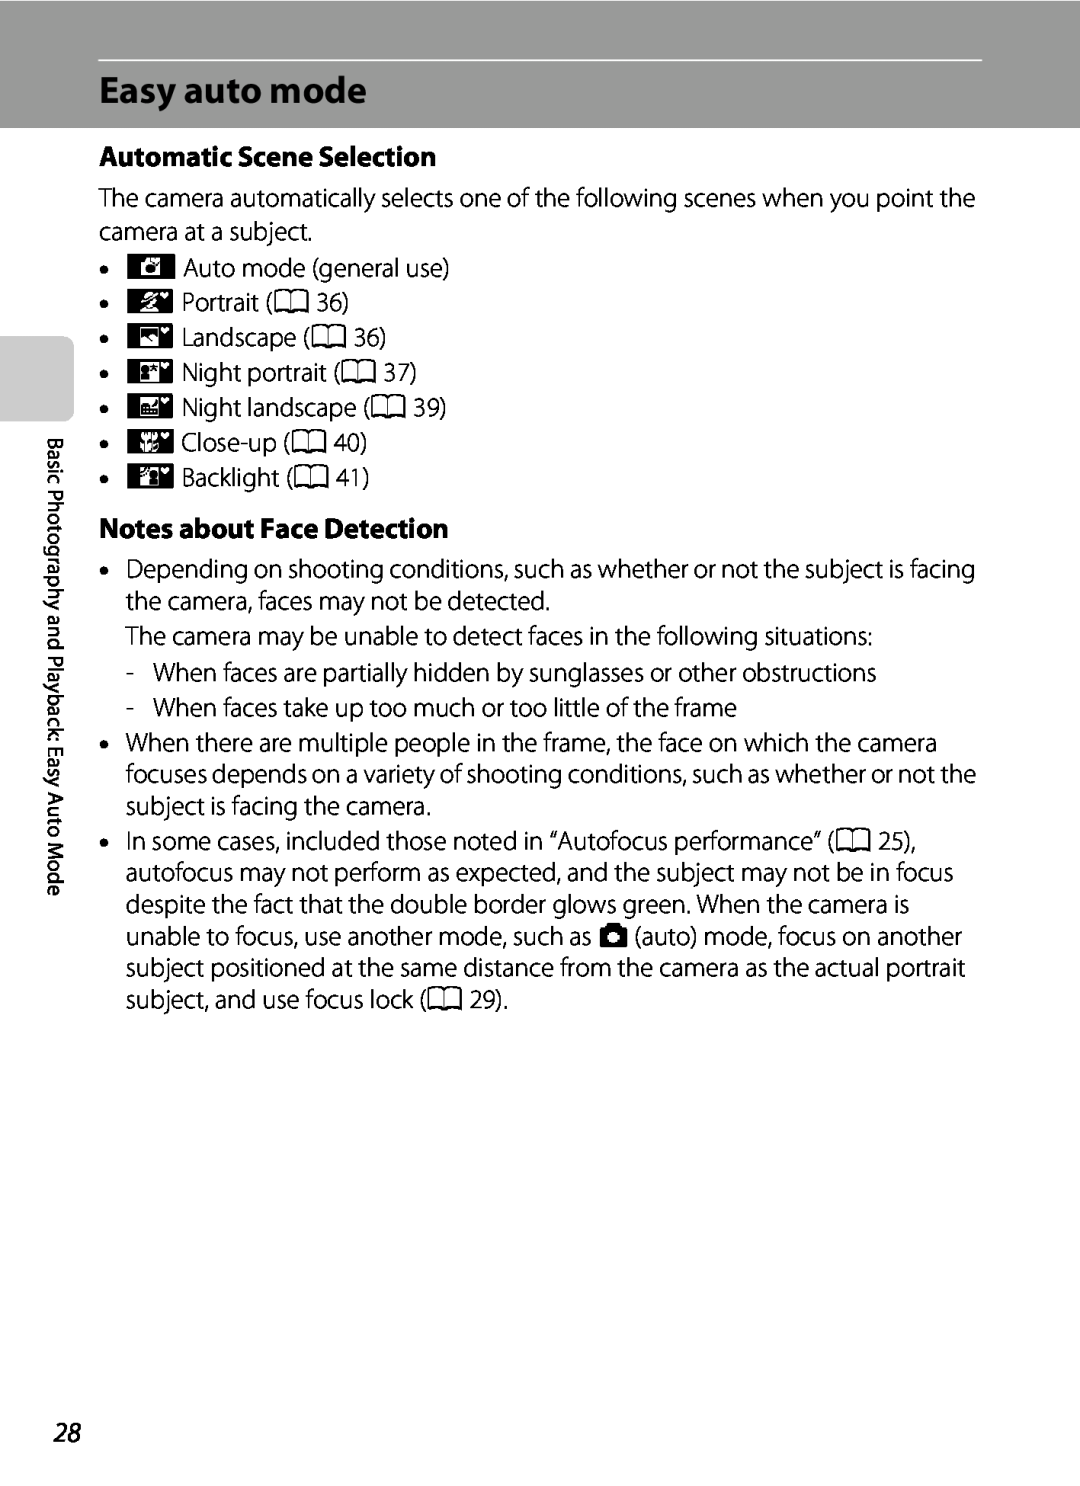 Nikon L21, COOLPIXL22R, COOLPIXL22BLK user manual Easy auto mode, Automatic Scene Selection, Notes about Face Detection 